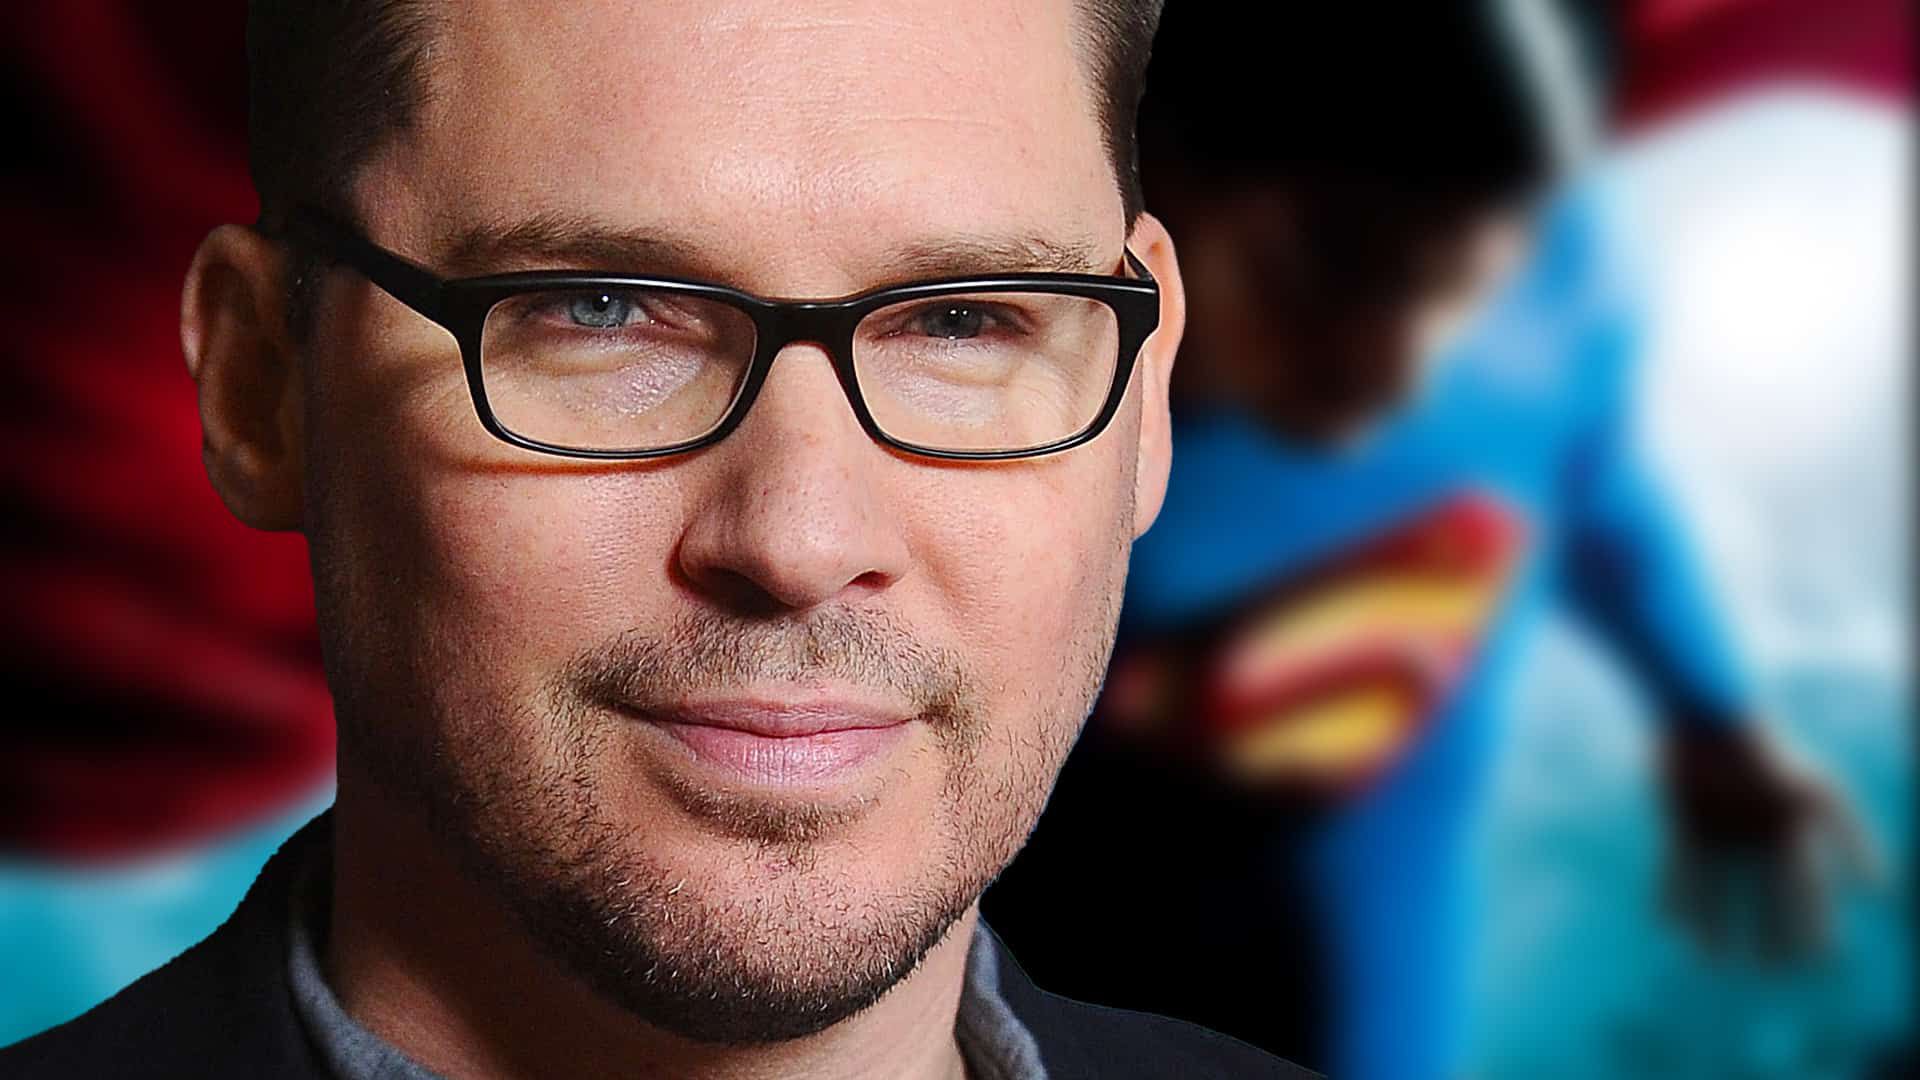 Disgraced Director Bryan Singer Has a New Movie on the Way